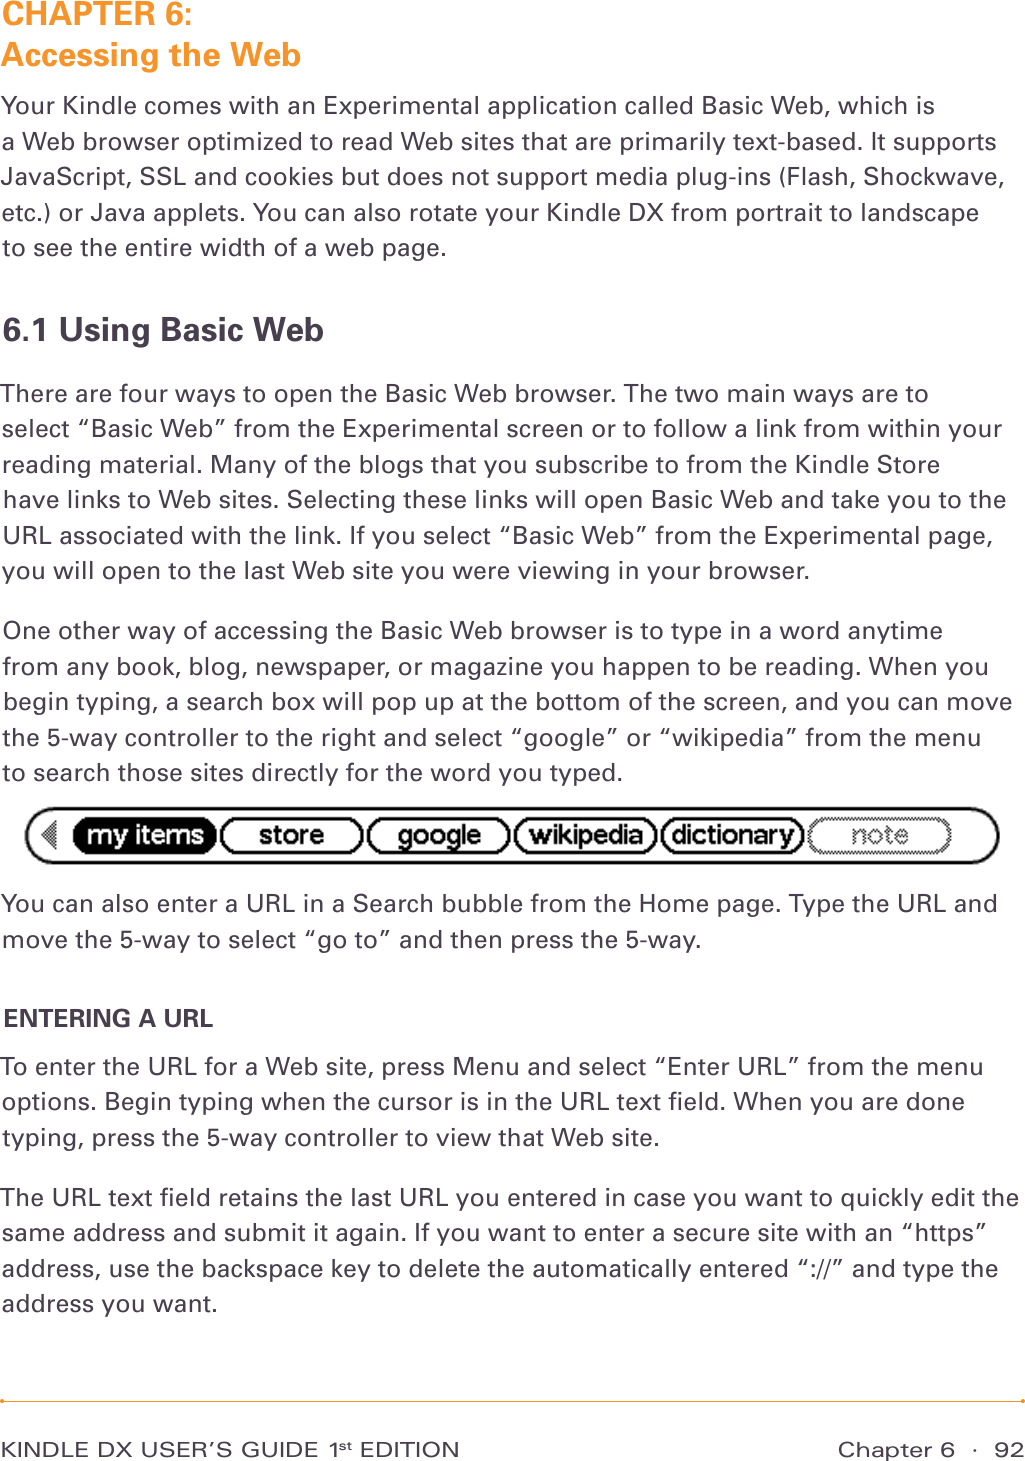 Chapter 6  ·  92KINDLE DX USER’S GUIDE 1st EDITIONCHAPTER 6:  Accessing the WebYour Kindle comes with an Experimental application called Basic Web, which is  a Web browser optimized to read Web sites that are primarily text-based. It supports JavaScript, SSL and cookies but does not support media plug-ins (Flash, Shockwave, etc.) or Java applets. You can also rotate your Kindle DX from portrait to landscape  to see the entire width of a web page.6.1 Using Basic WebThere are four ways to open the Basic Web browser. The two main ways are to  select “Basic Web” from the Experimental screen or to follow a link from within your reading material. Many of the blogs that you subscribe to from the Kindle Store  have links to Web sites. Selecting these links will open Basic Web and take you to the URL associated with the link. If you select “Basic Web” from the Experimental page, you will open to the last Web site you were viewing in your browser.One other way of accessing the Basic Web browser is to type in a word anytime  from any book, blog, newspaper, or magazine you happen to be reading. When you begin typing, a search box will pop up at the bottom of the screen, and you can move the 5-way controller to the right and select “google” or “wikipedia” from the menu  to search those sites directly for the word you typed.You can also enter a URL in a Search bubble from the Home page. Type the URL and move the 5-way to select “go to” and then press the 5-way.ENTERING A URLTo enter the URL for a Web site, press Menu and select “Enter URL” from the menu options. Begin typing when the cursor is in the URL text ﬁeld. When you are done typing, press the 5-way controller to view that Web site.The URL text ﬁeld retains the last URL you entered in case you want to quickly edit the same address and submit it again. If you want to enter a secure site with an “https” address, use the backspace key to delete the automatically entered “://” and type the address you want.